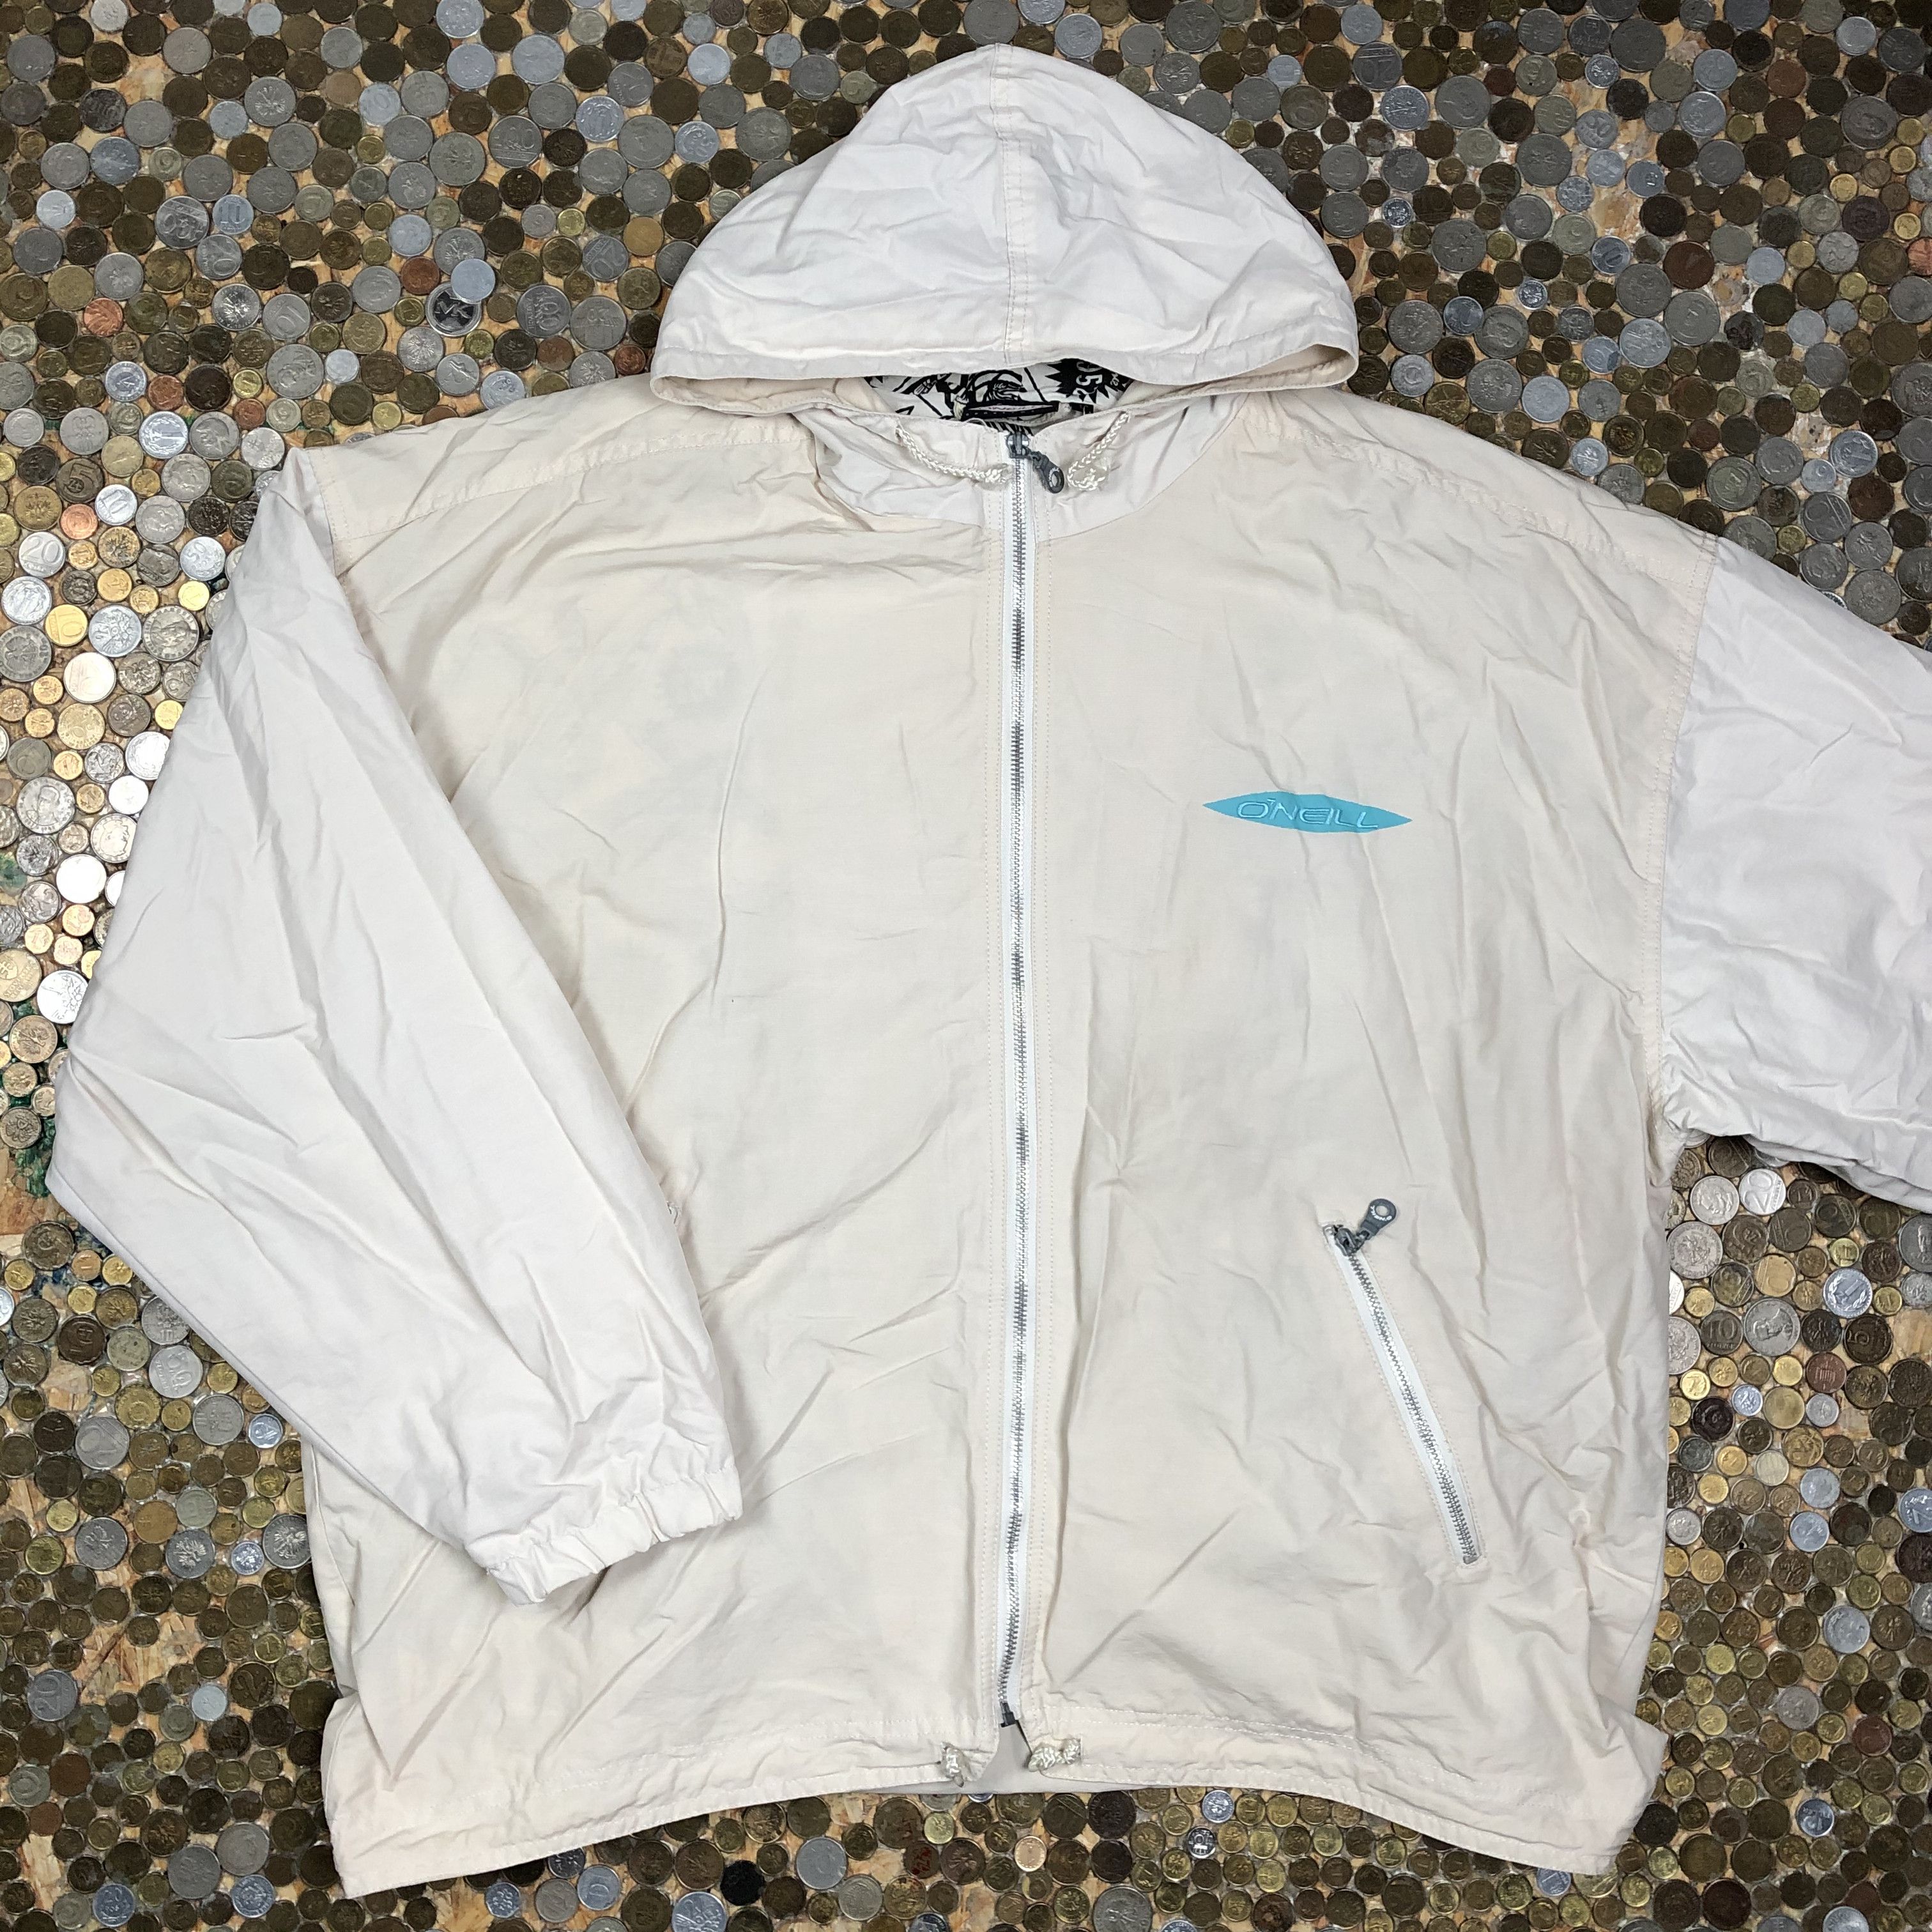 Oneill Oneill Jacket with hoodie Surfing Game | Grailed